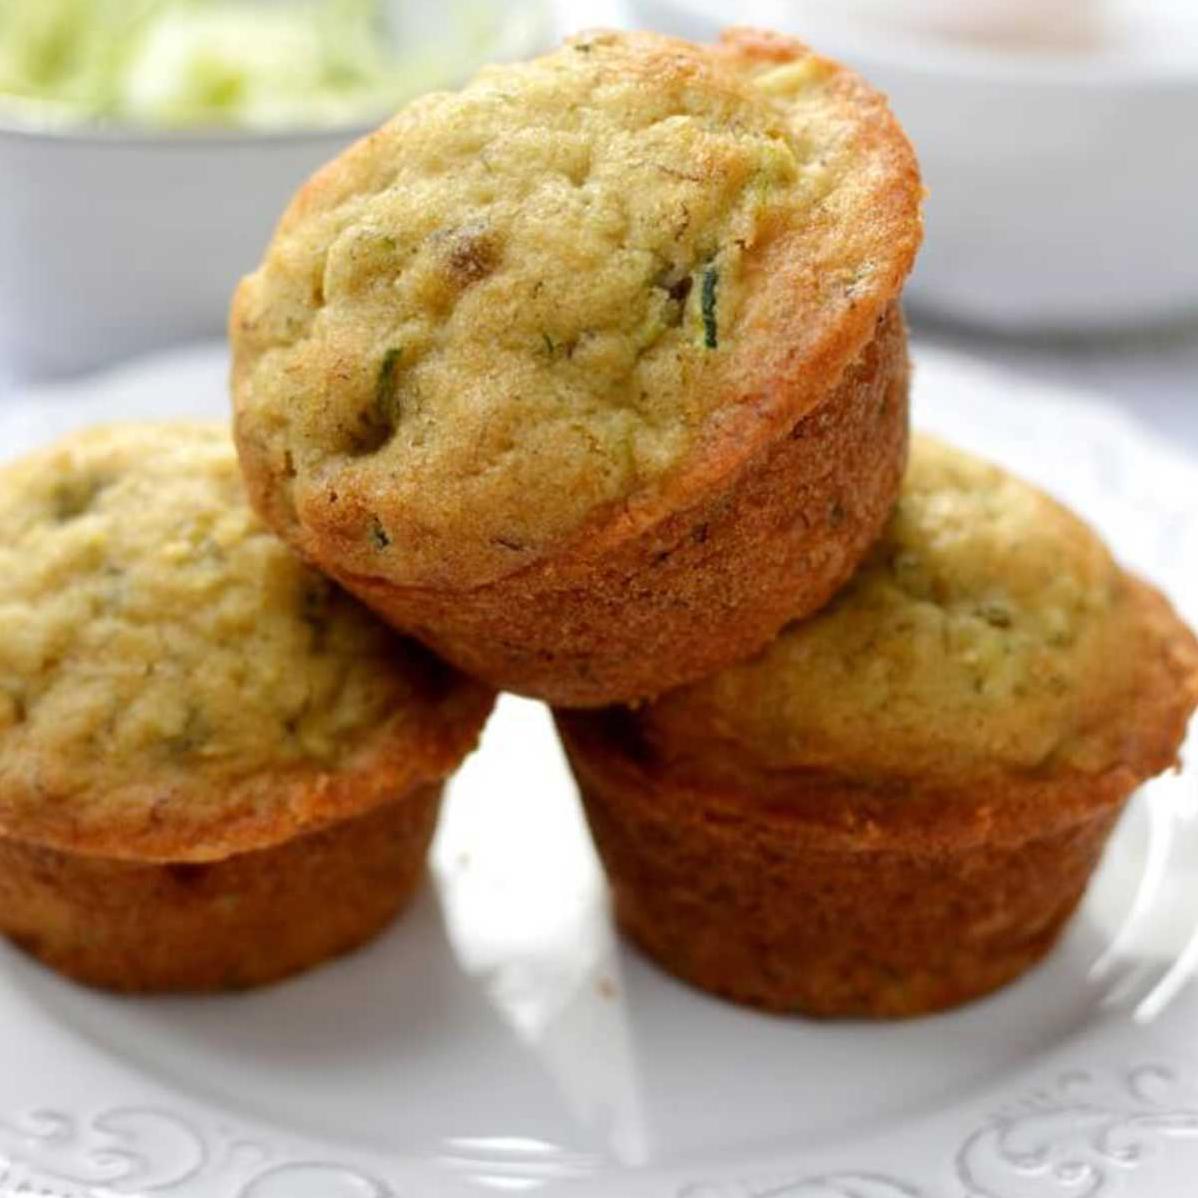  Whip up a batch of these easy-to-make muffins for a tasty and healthy treat.